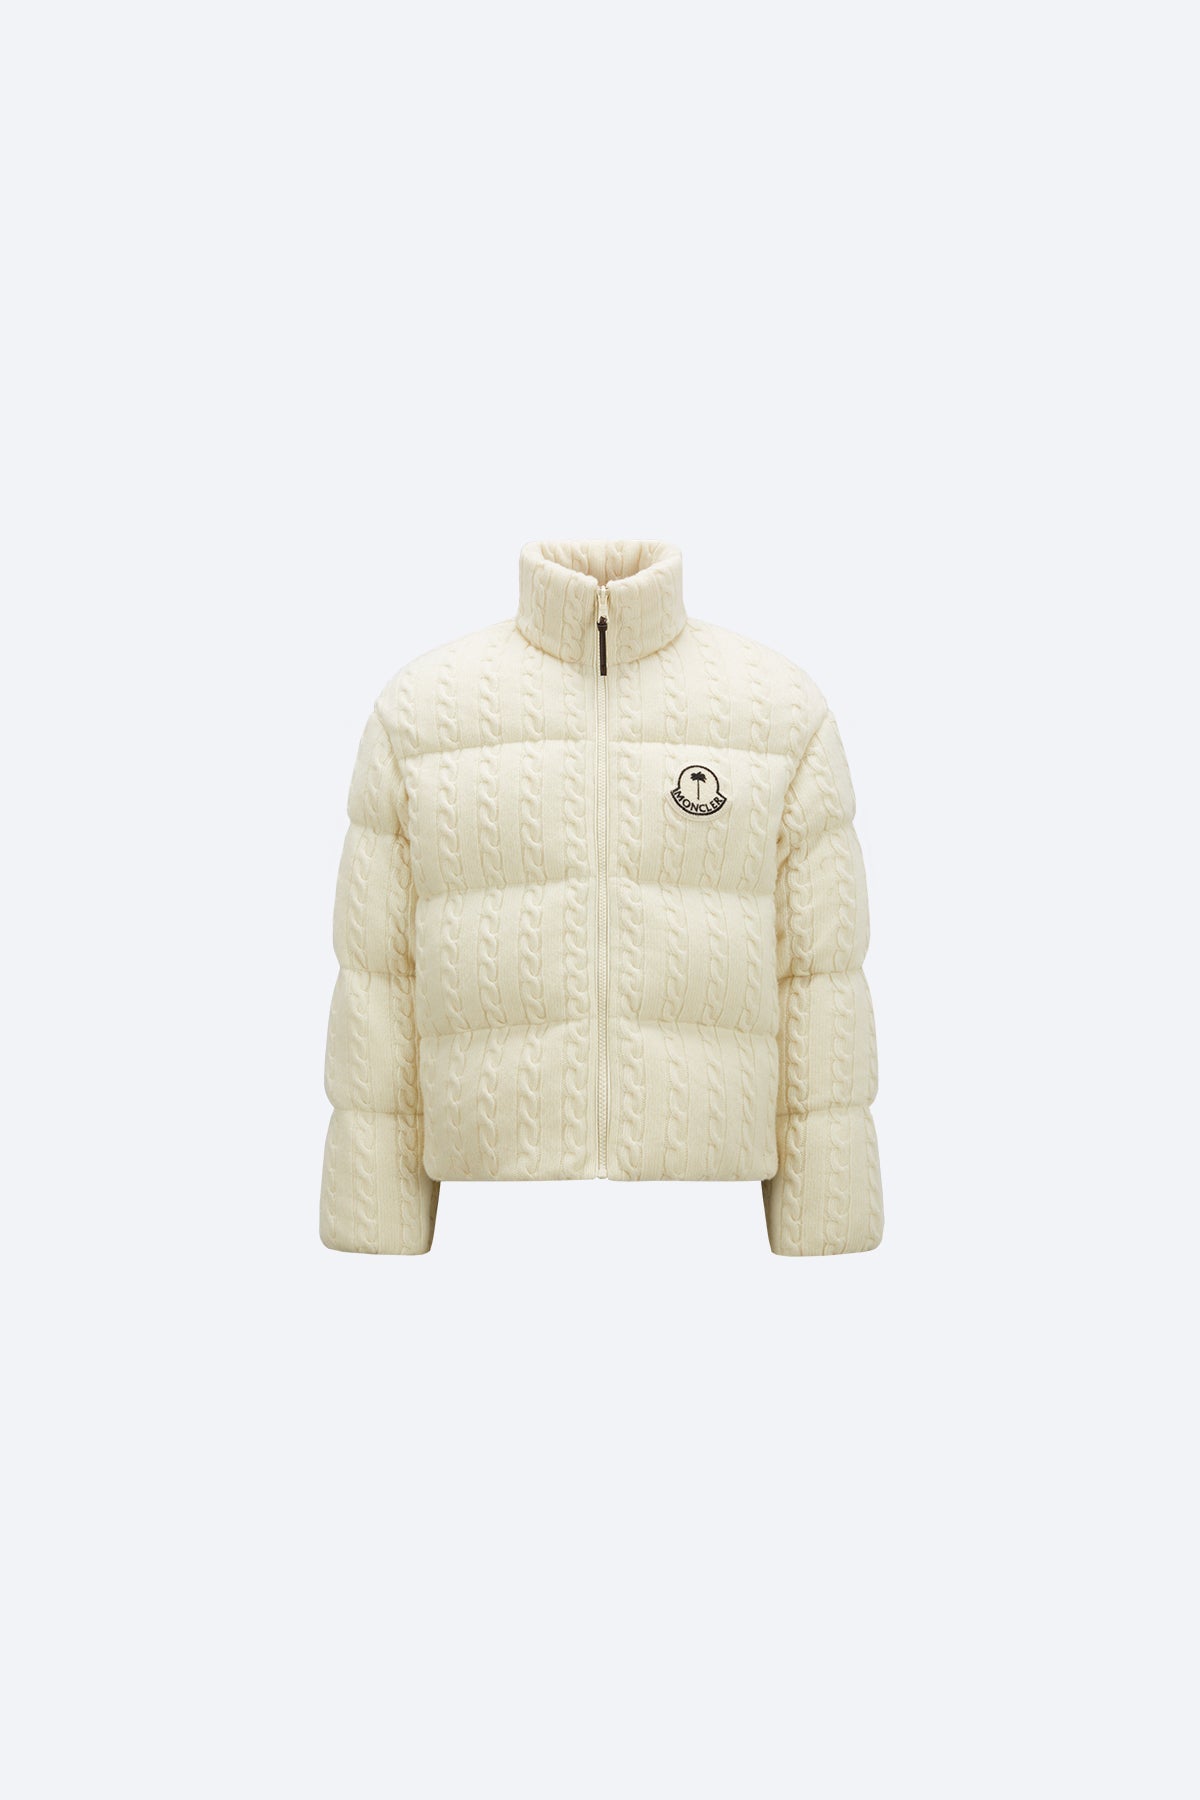 MONCLER X PALM ANGELS | DENDRITE WOOL DOWN JACKET